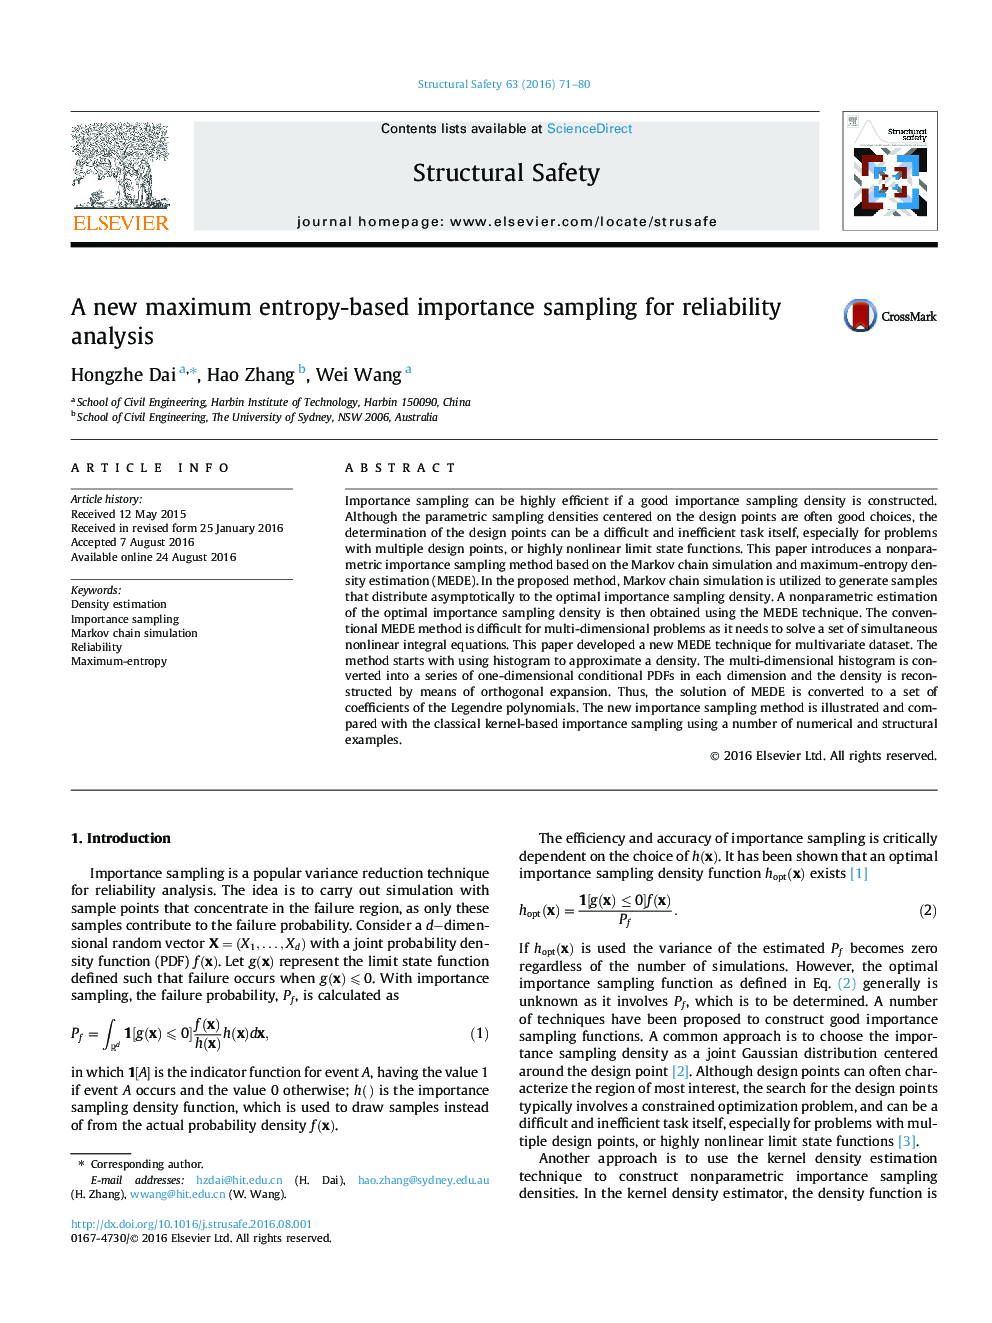 A new maximum entropy-based importance sampling for reliability analysis